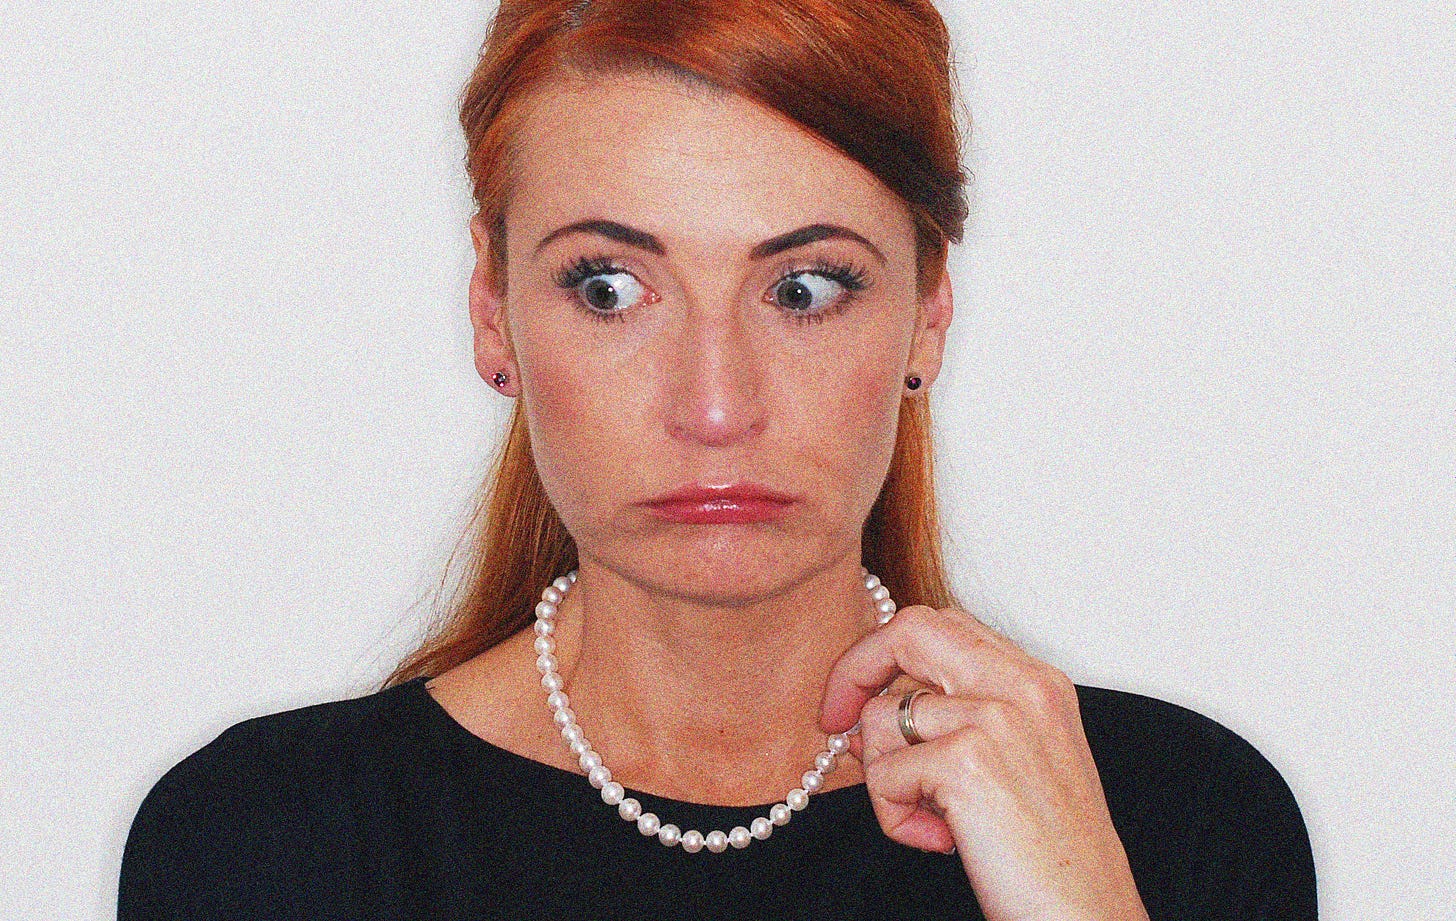 A head and shoulders shot of Catherine, a (then) 42 year old white woman with long red hair, her eyes wide and shocked and mouth closed with lips and cheeks puffed out. She is clutching a string of pearls with one hand and wearing a plain black top